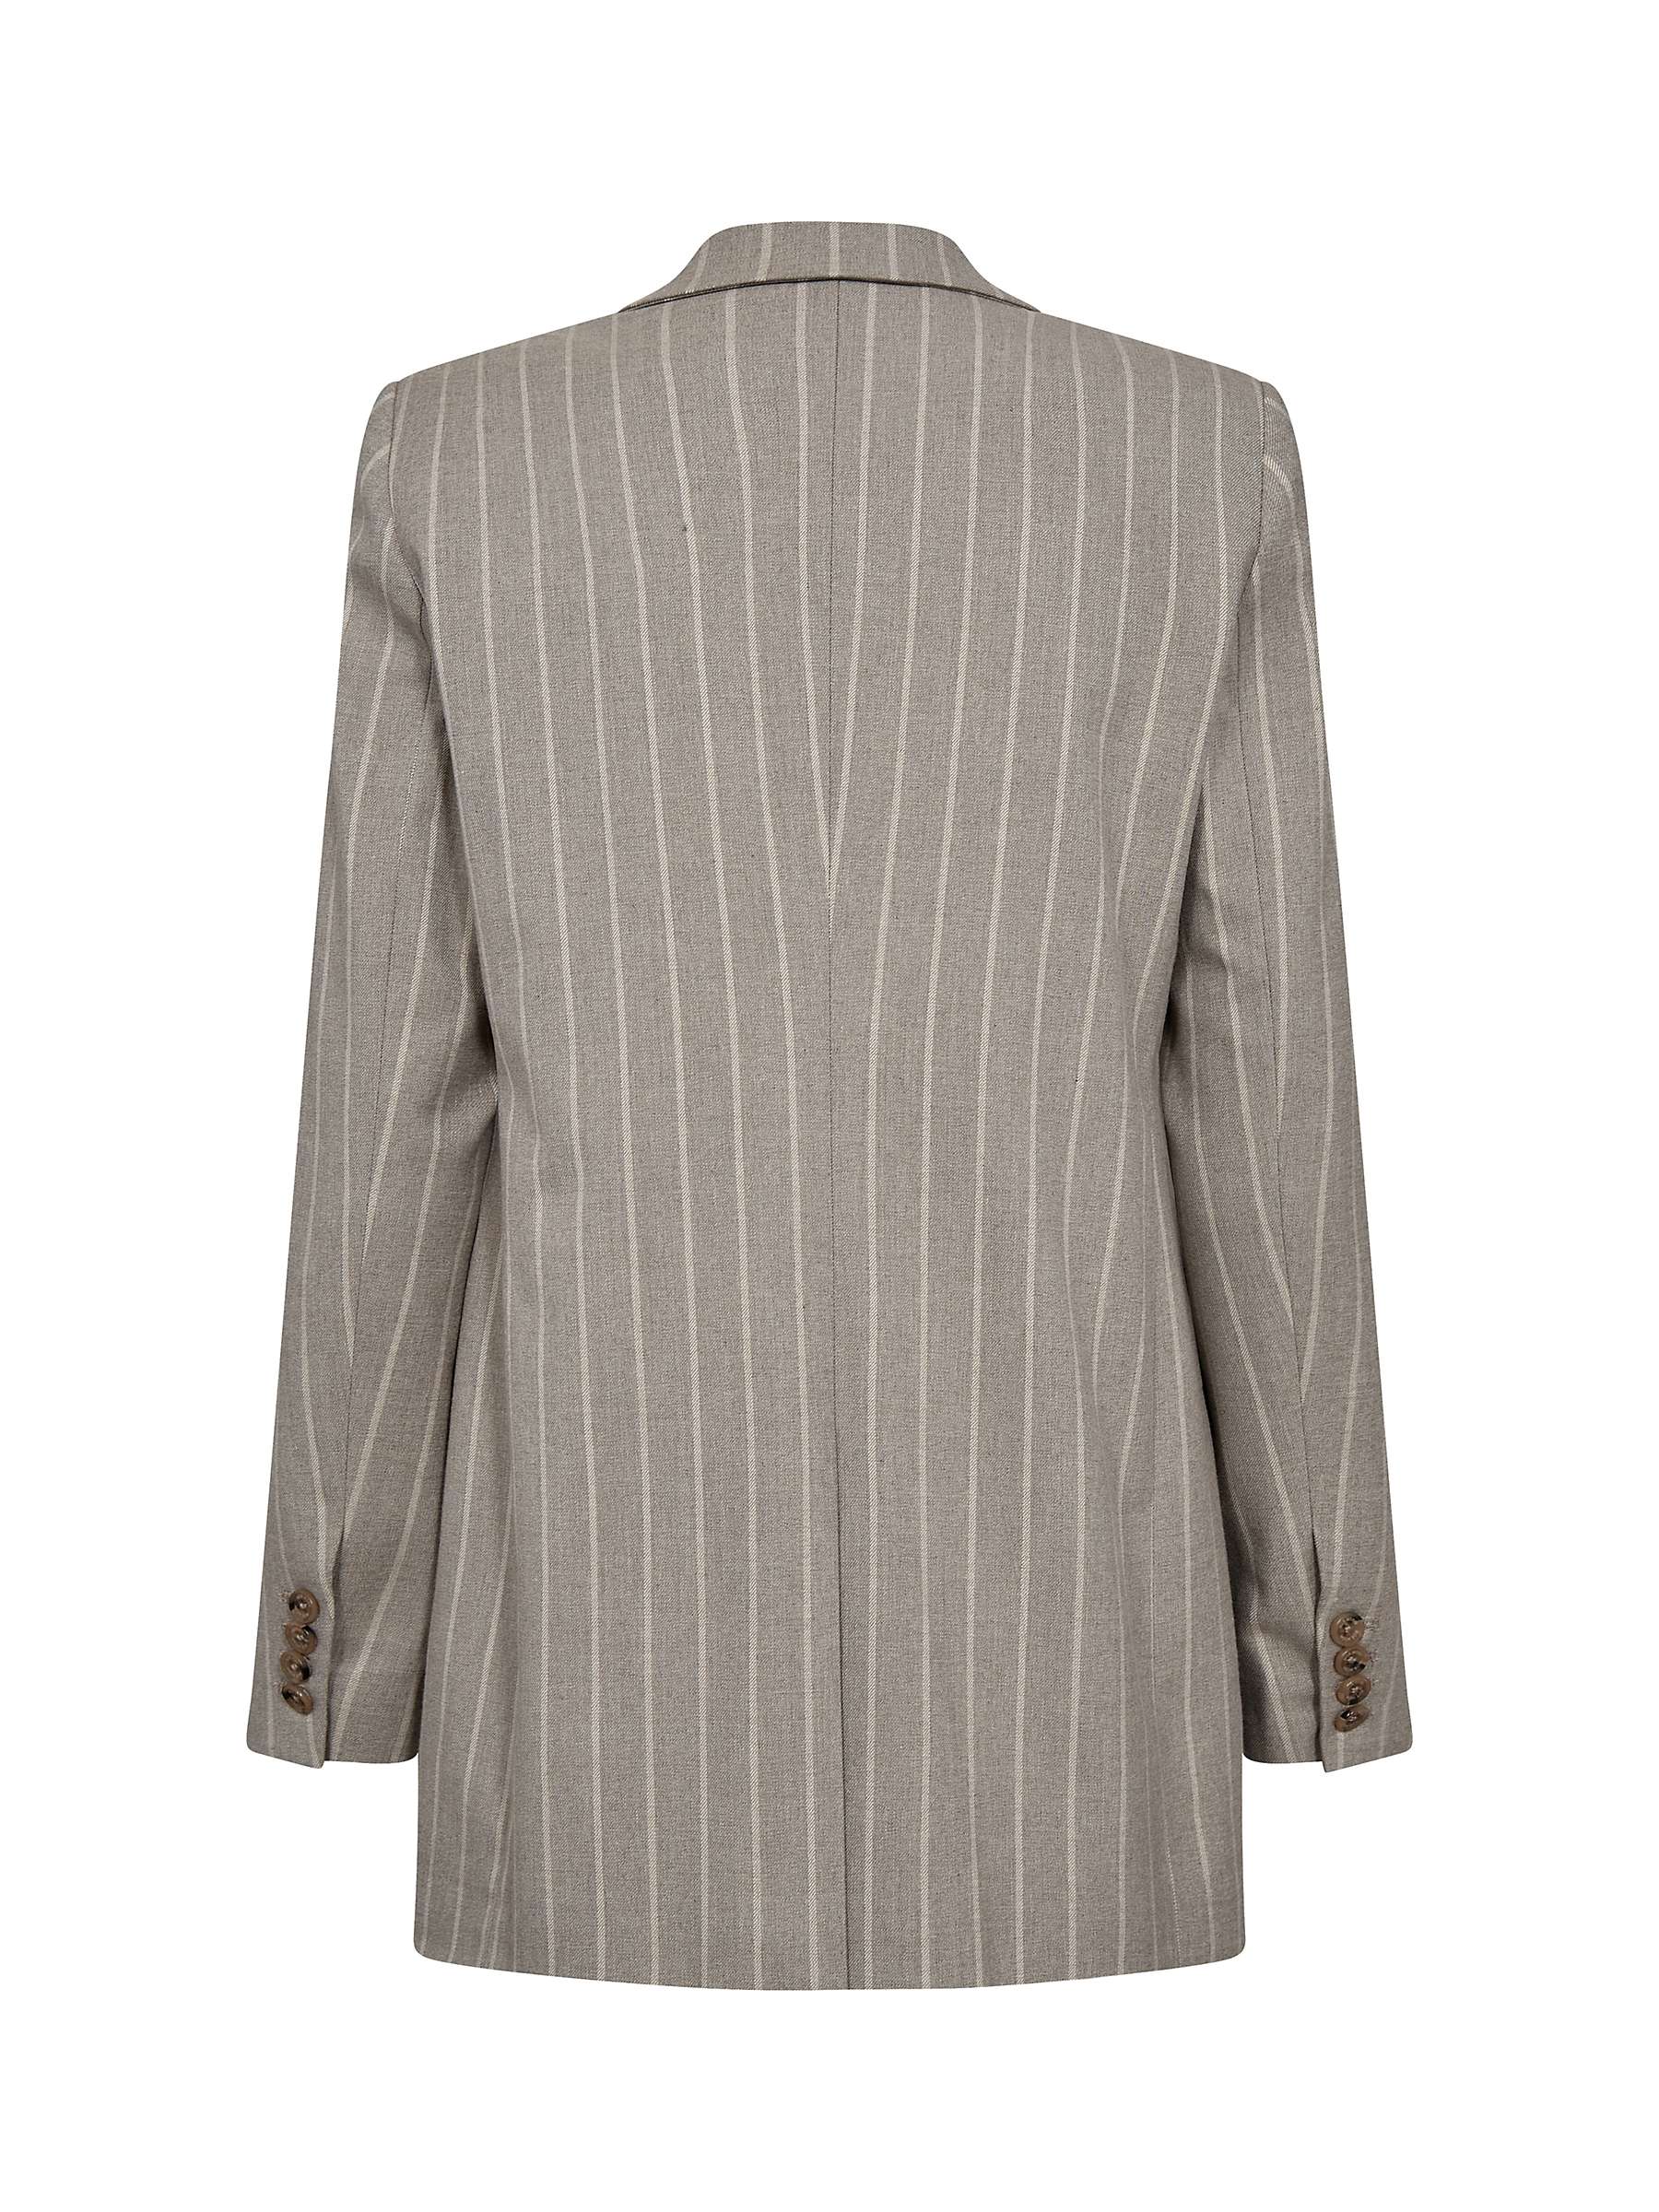 Buy MOS MOSH Milla Soft Stripe Double Breasted Blazer, Roasted Cashew Online at johnlewis.com